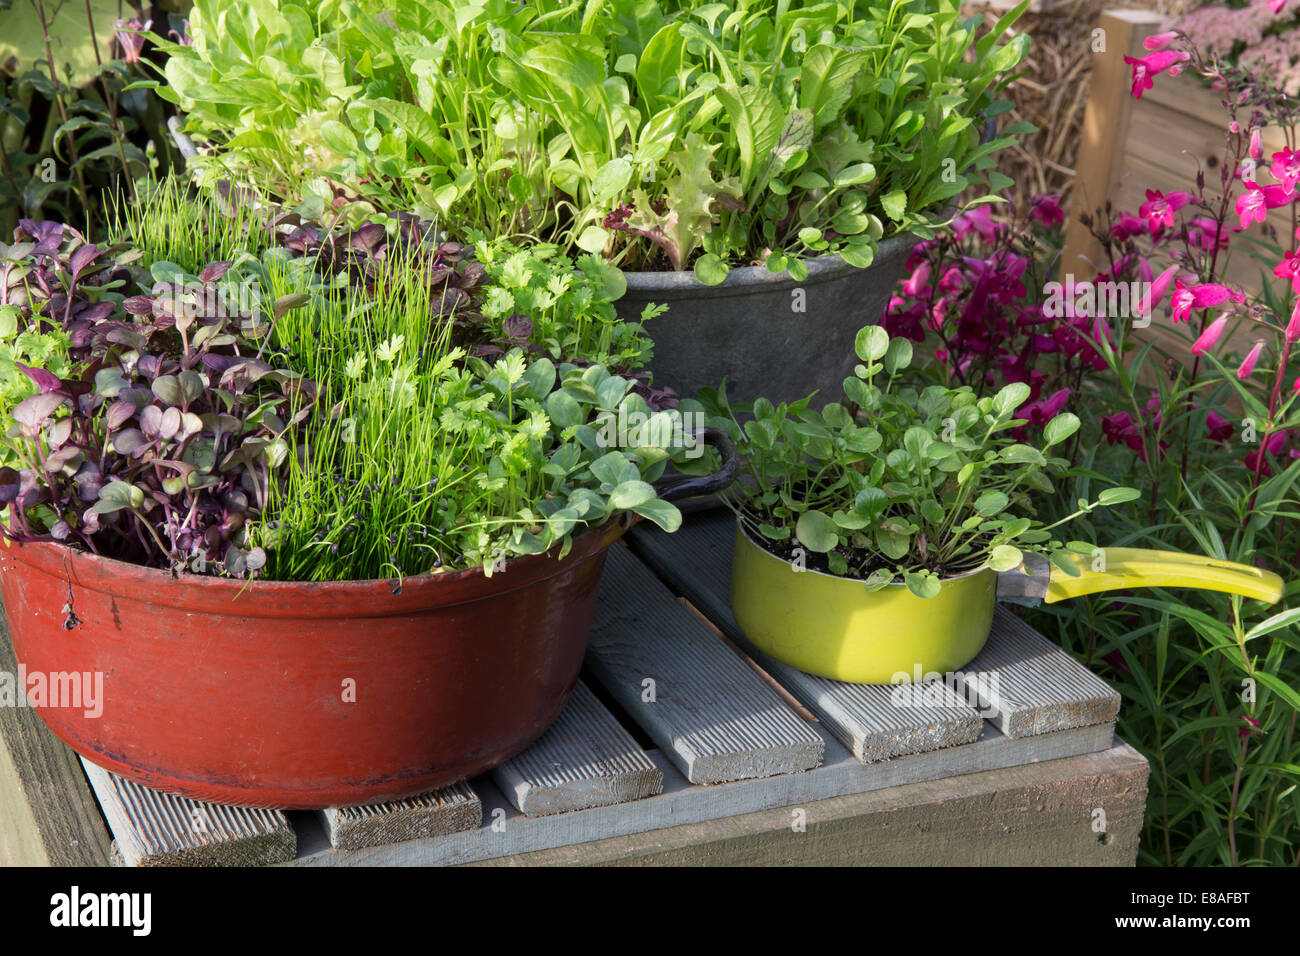 Small kitchen garden with salad crops micro greens growing in unusual containers land cress grown in saucepan winter salad mix lettuce leaves UK Stock Photo